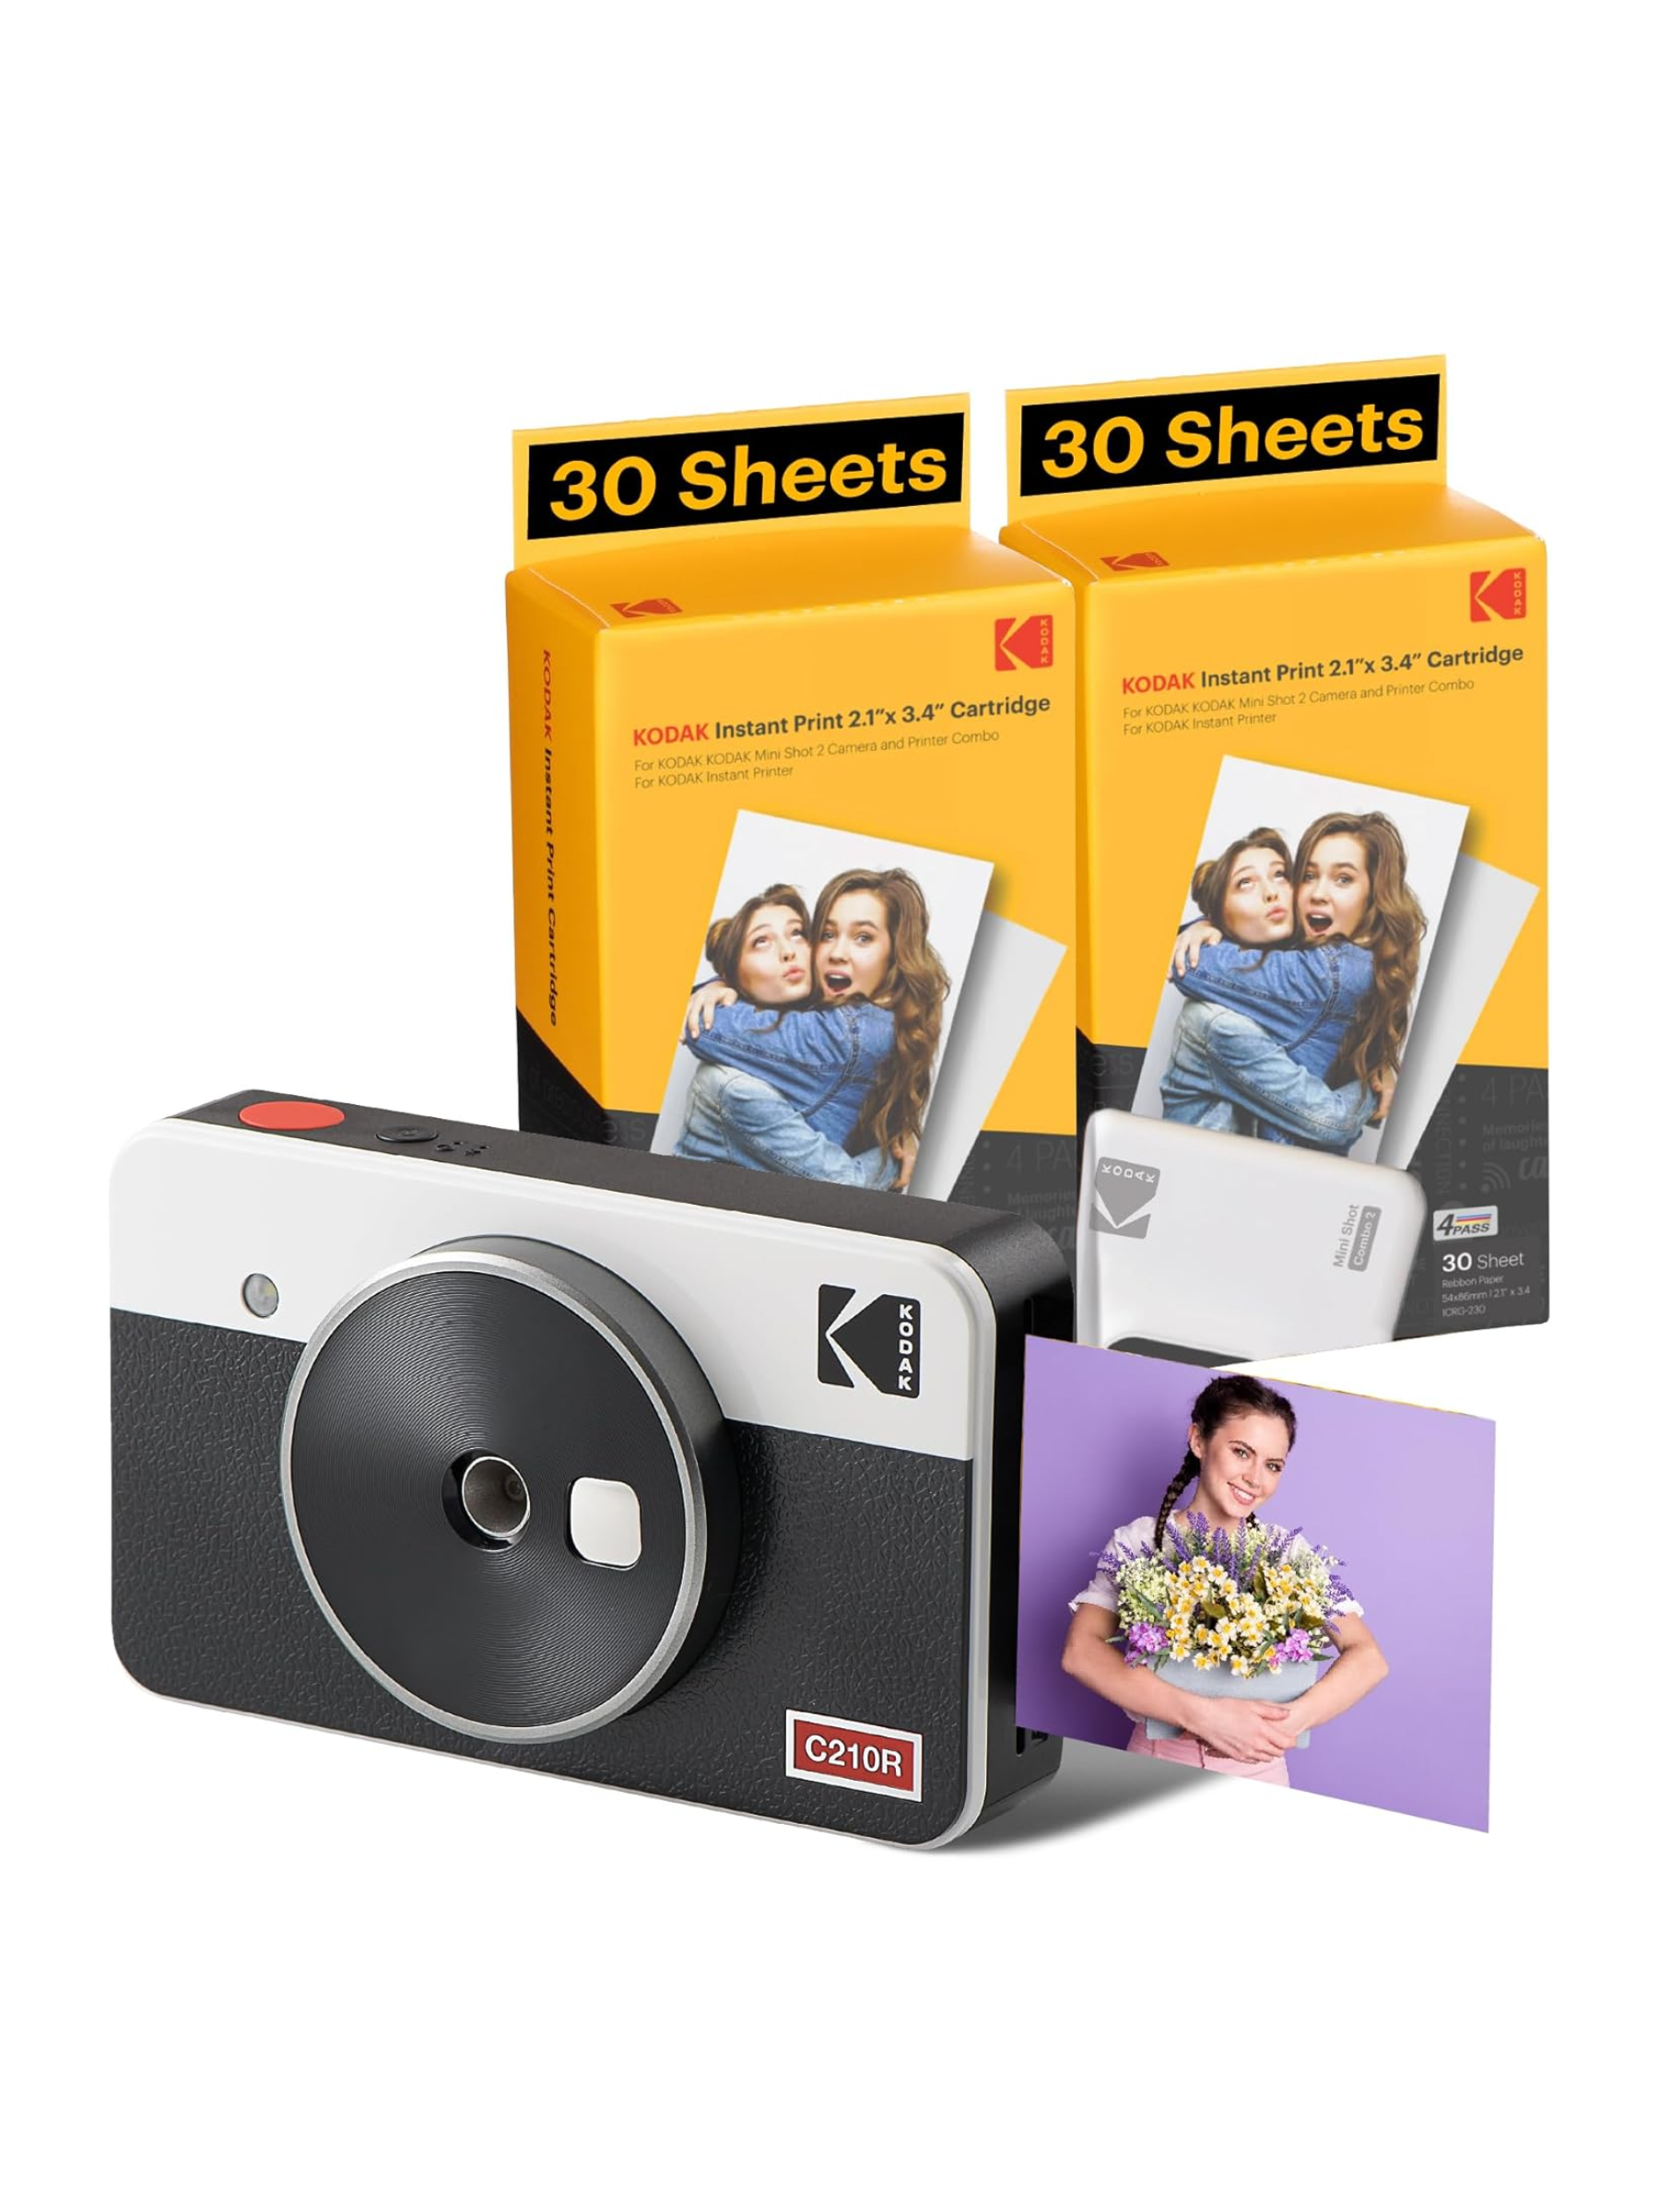 Between milestone birthdays, graduation, and prom, there are plenty of memories to capture in the 18th year. Instead of filling up the camera roll on their cell, gift this mini digital camera that gives pics a retro vibe and lets them print instantly from the same device. $160, Amazon. <a href="https://www.amazon.com/dp/B088PQR3YL?">Get it now!</a><p>Sign up for today’s biggest stories, from pop culture to politics.</p><a href="https://www.glamour.com/newsletter/news?sourceCode=msnsend">Sign Up</a>